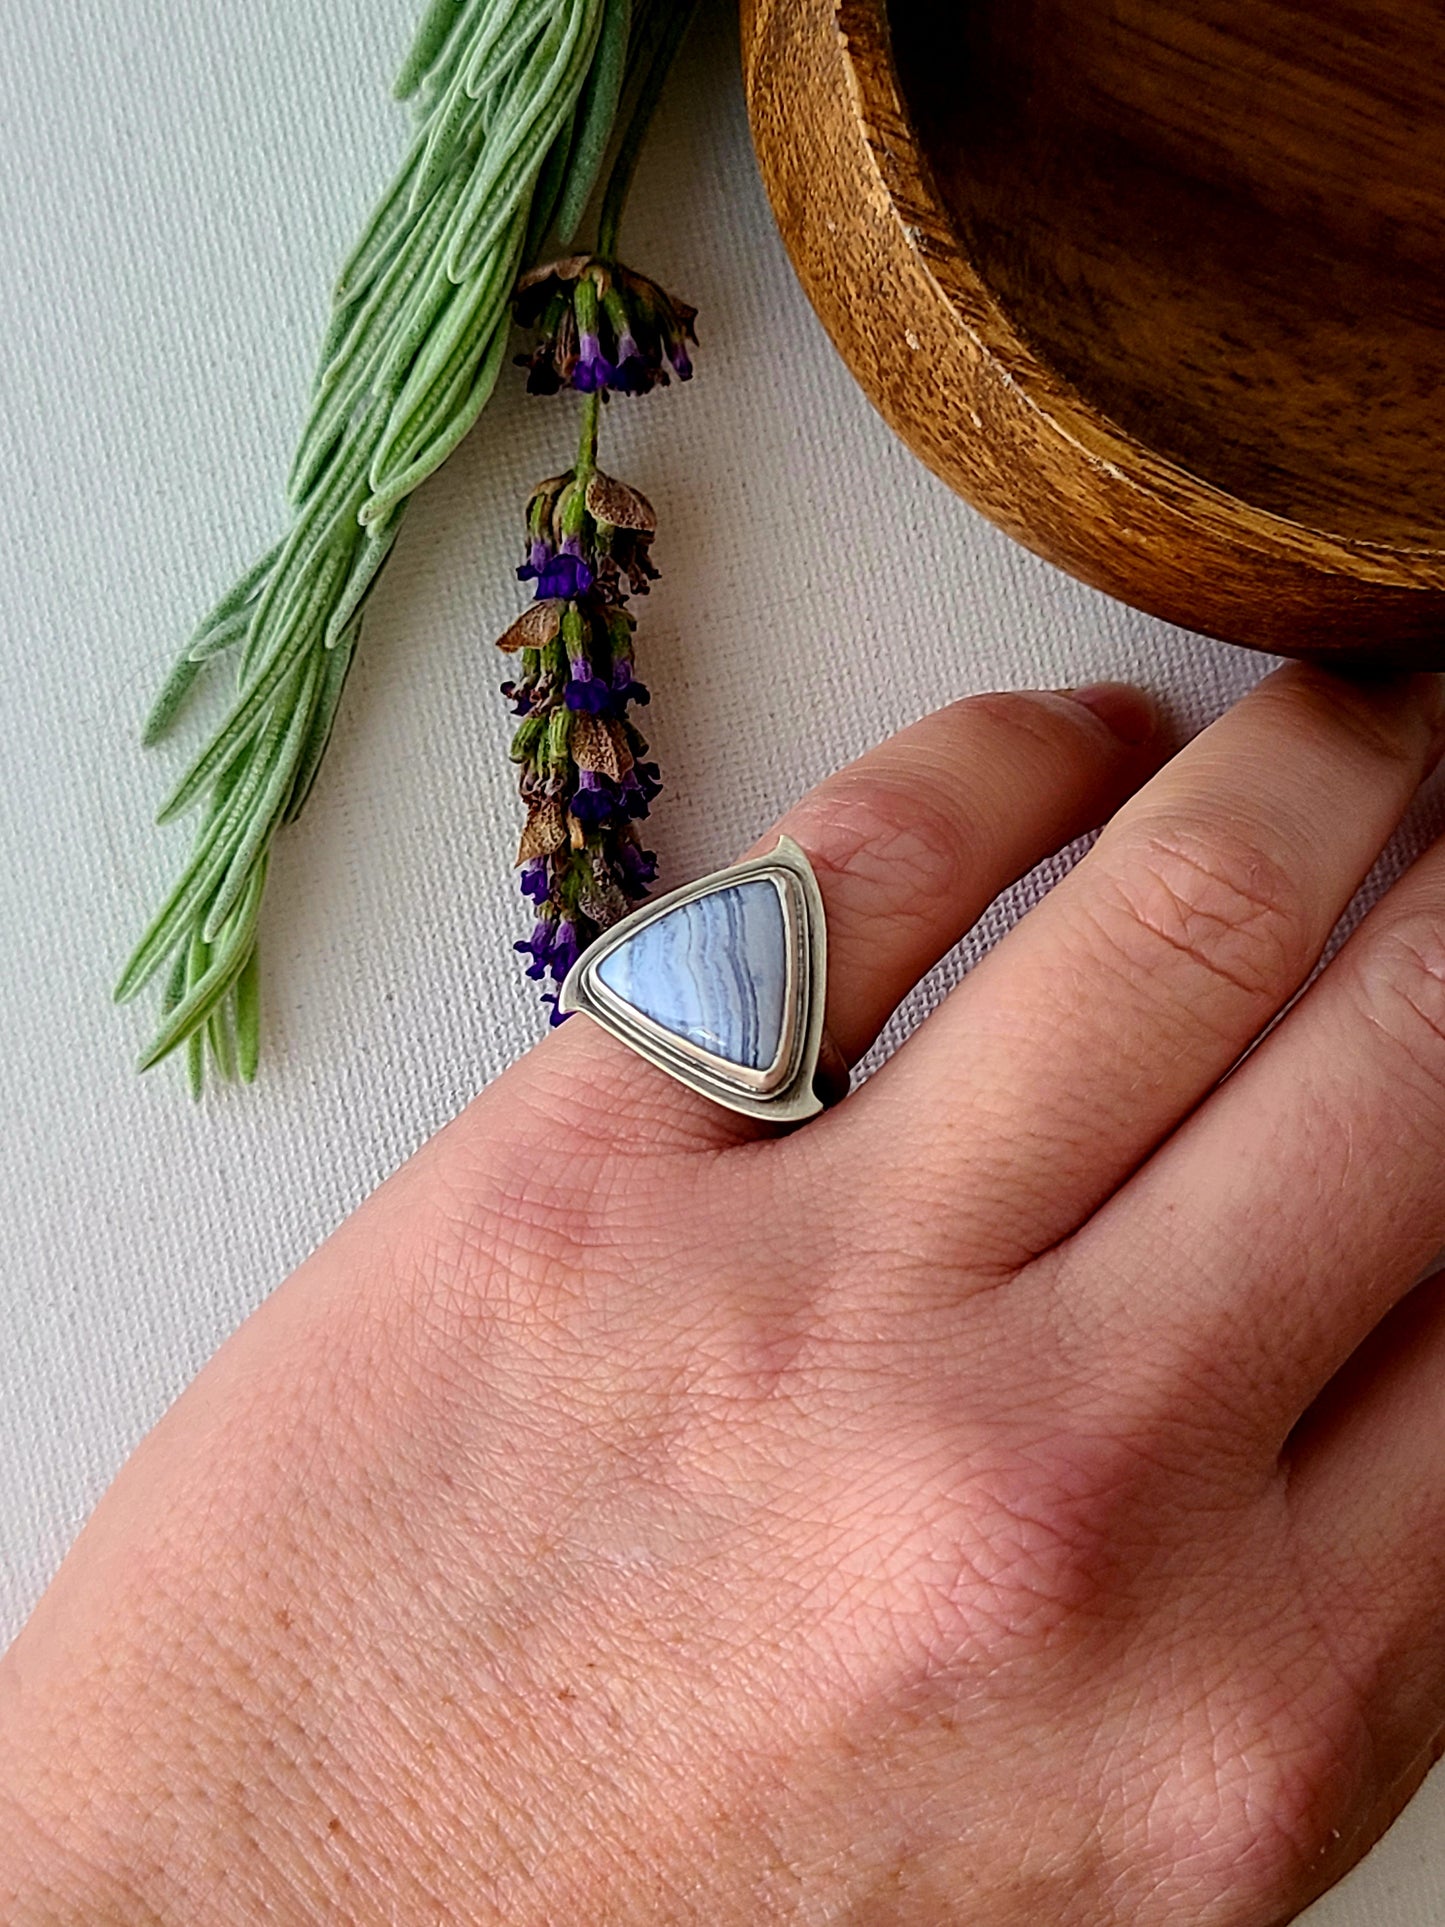 Blue Mist: Triangle Agate Ring-size 6 US